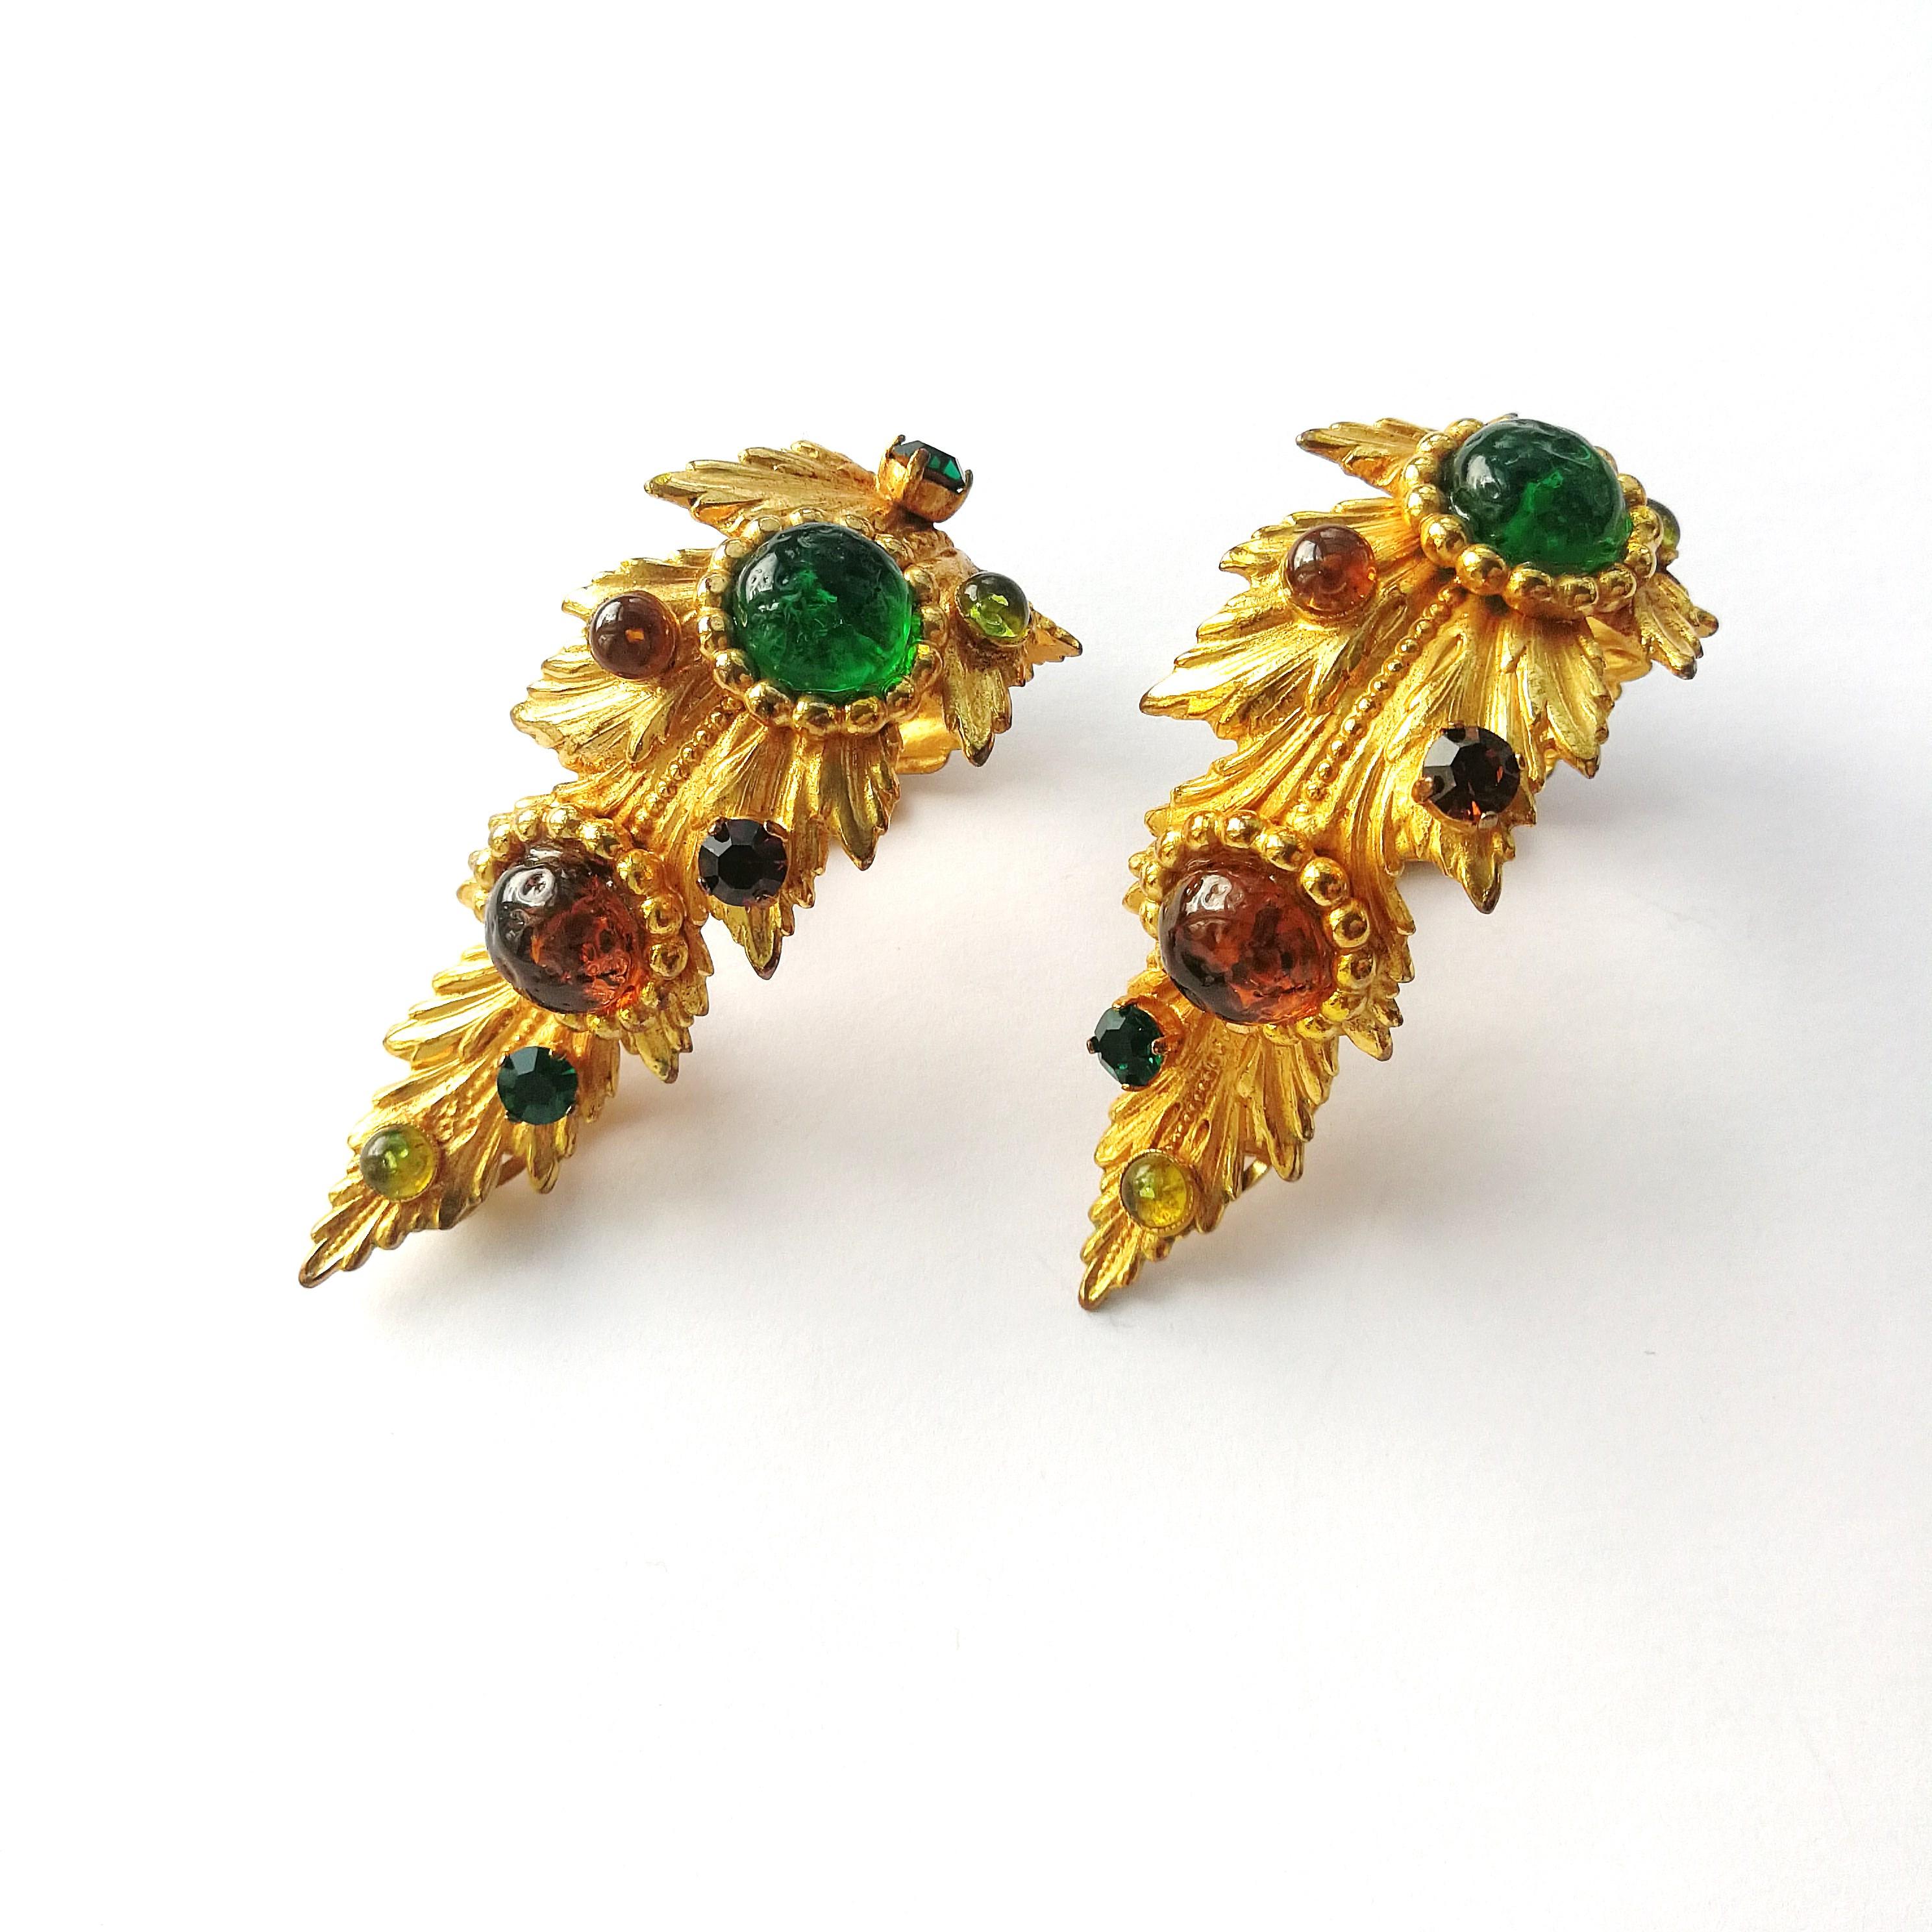 Baroque Outstanding gilt metal and jewelled 'leaf' earrings, Dominique Aurientis, 1980s